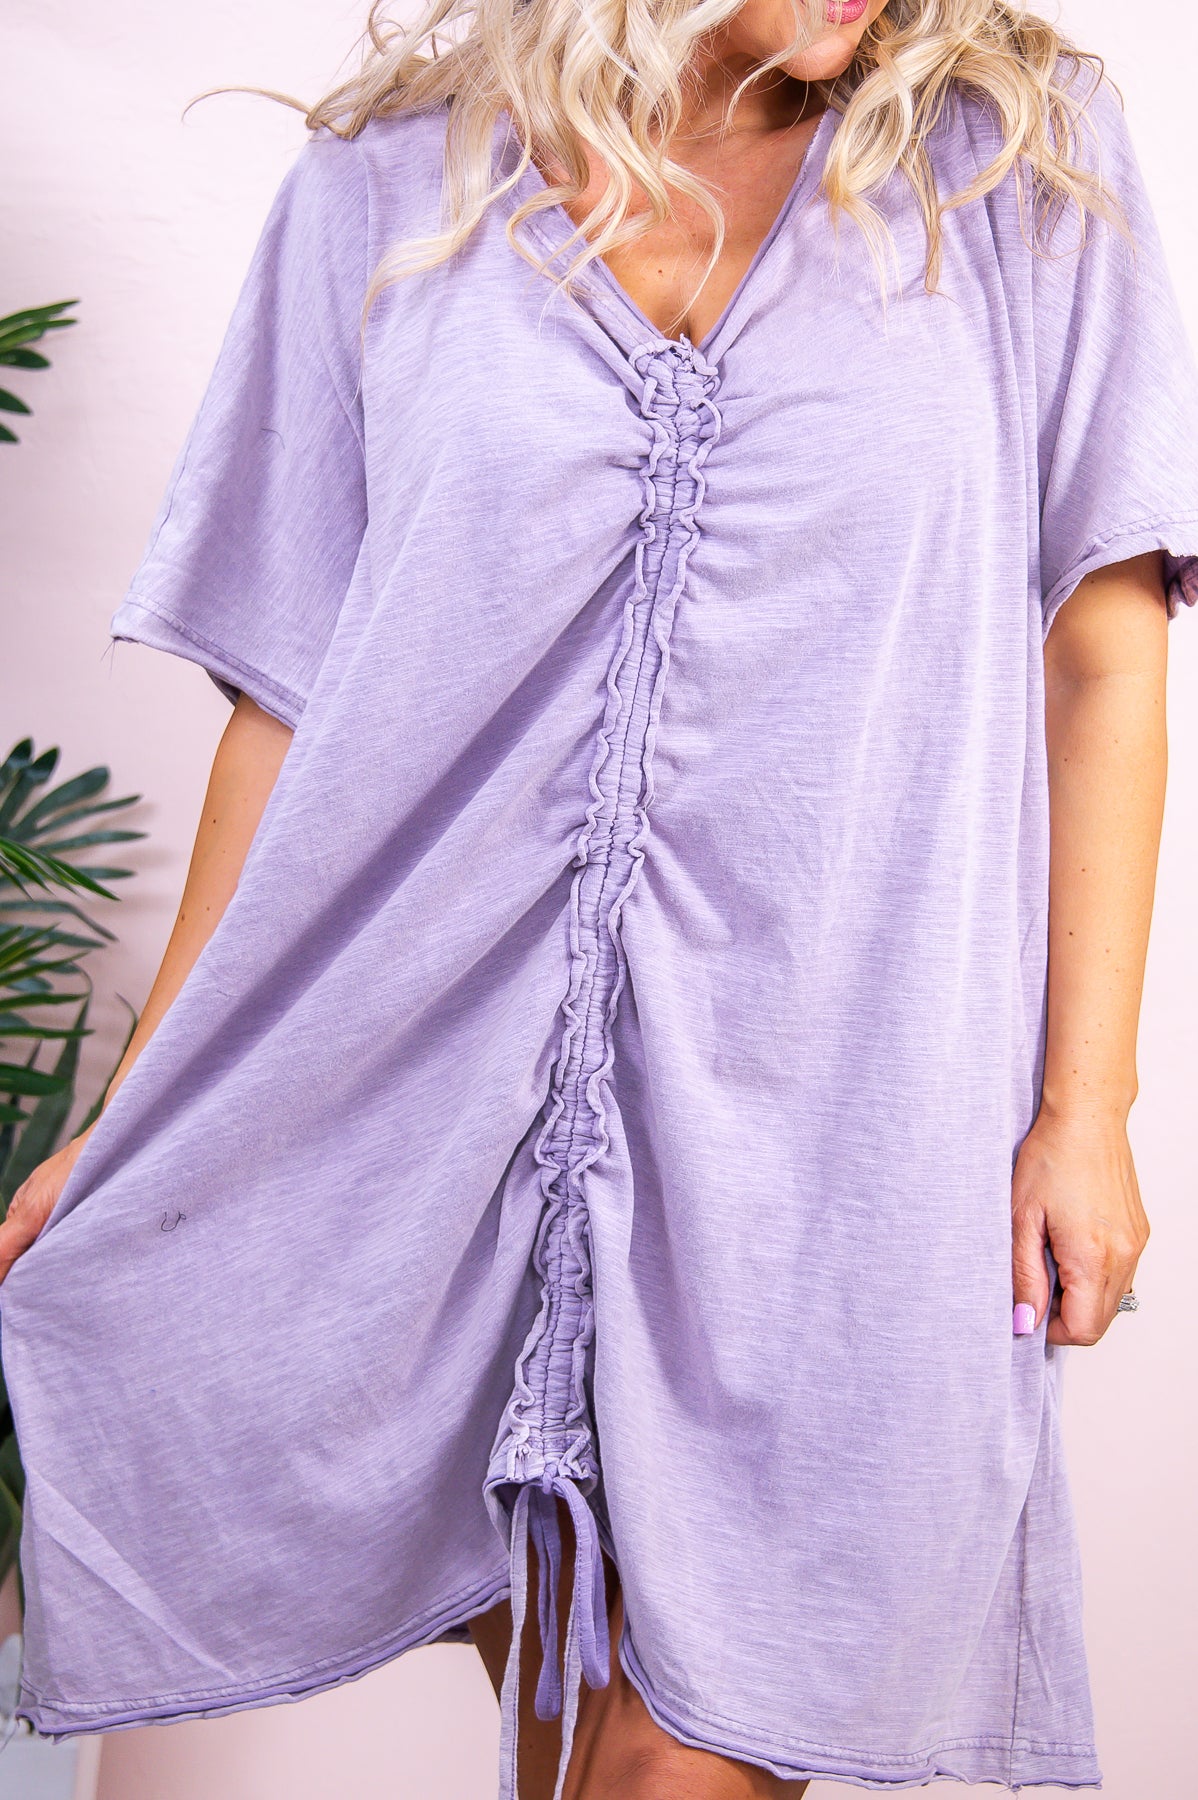 Sea Of Sand Lavender Solid Convertible Dress - D5166LV